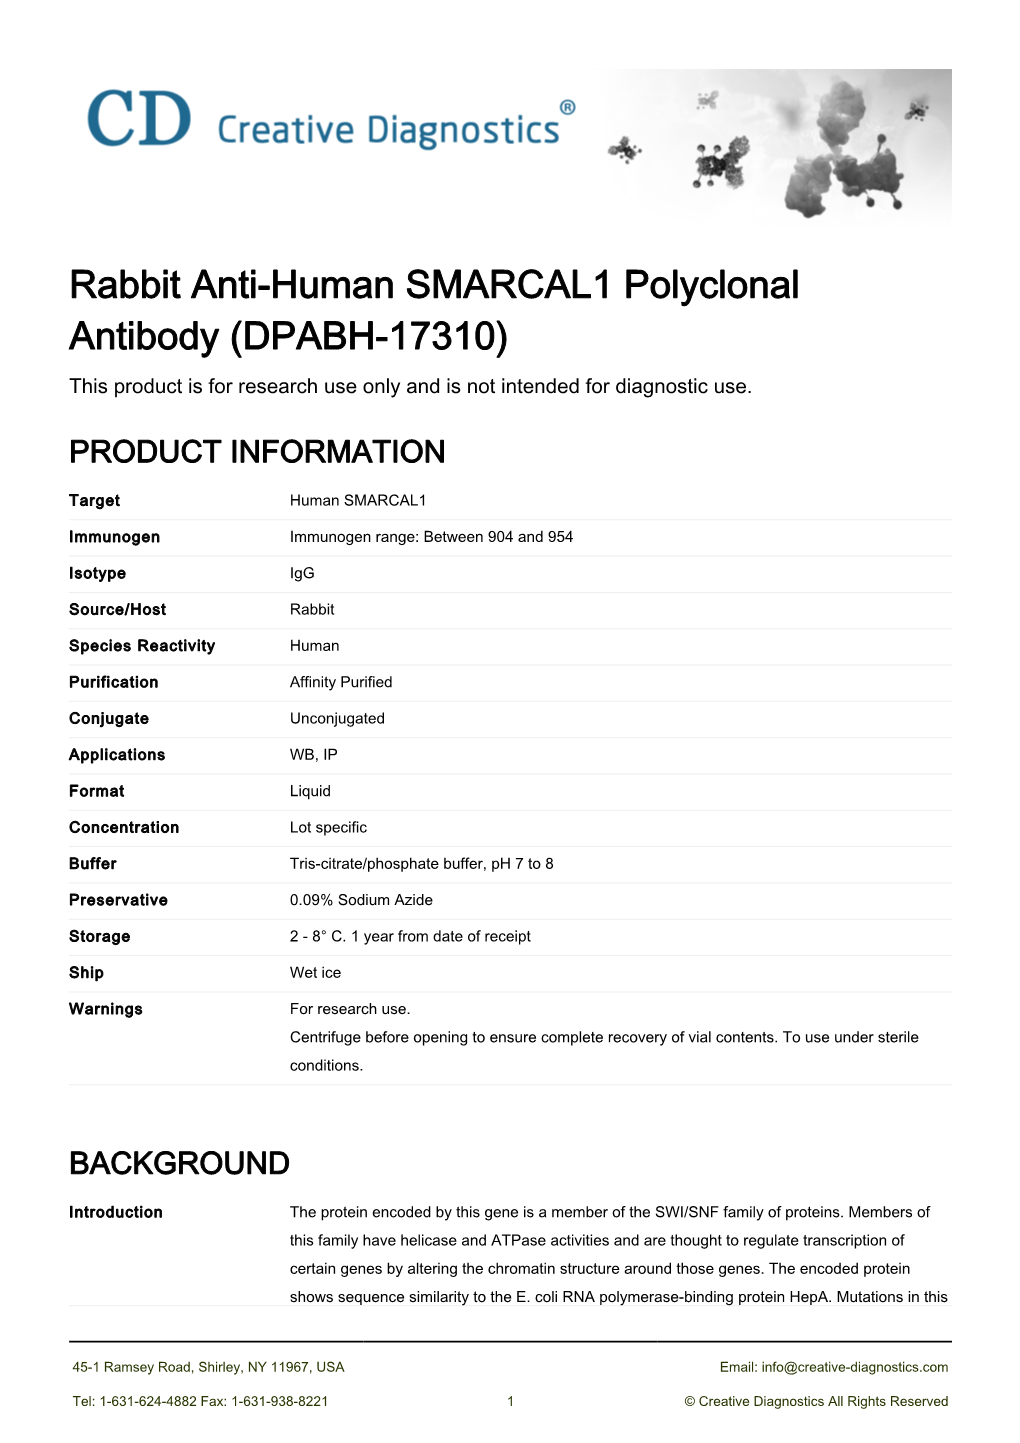 Rabbit Anti-Human SMARCAL1 Polyclonal Antibody (DPABH-17310) This Product Is for Research Use Only and Is Not Intended for Diagnostic Use